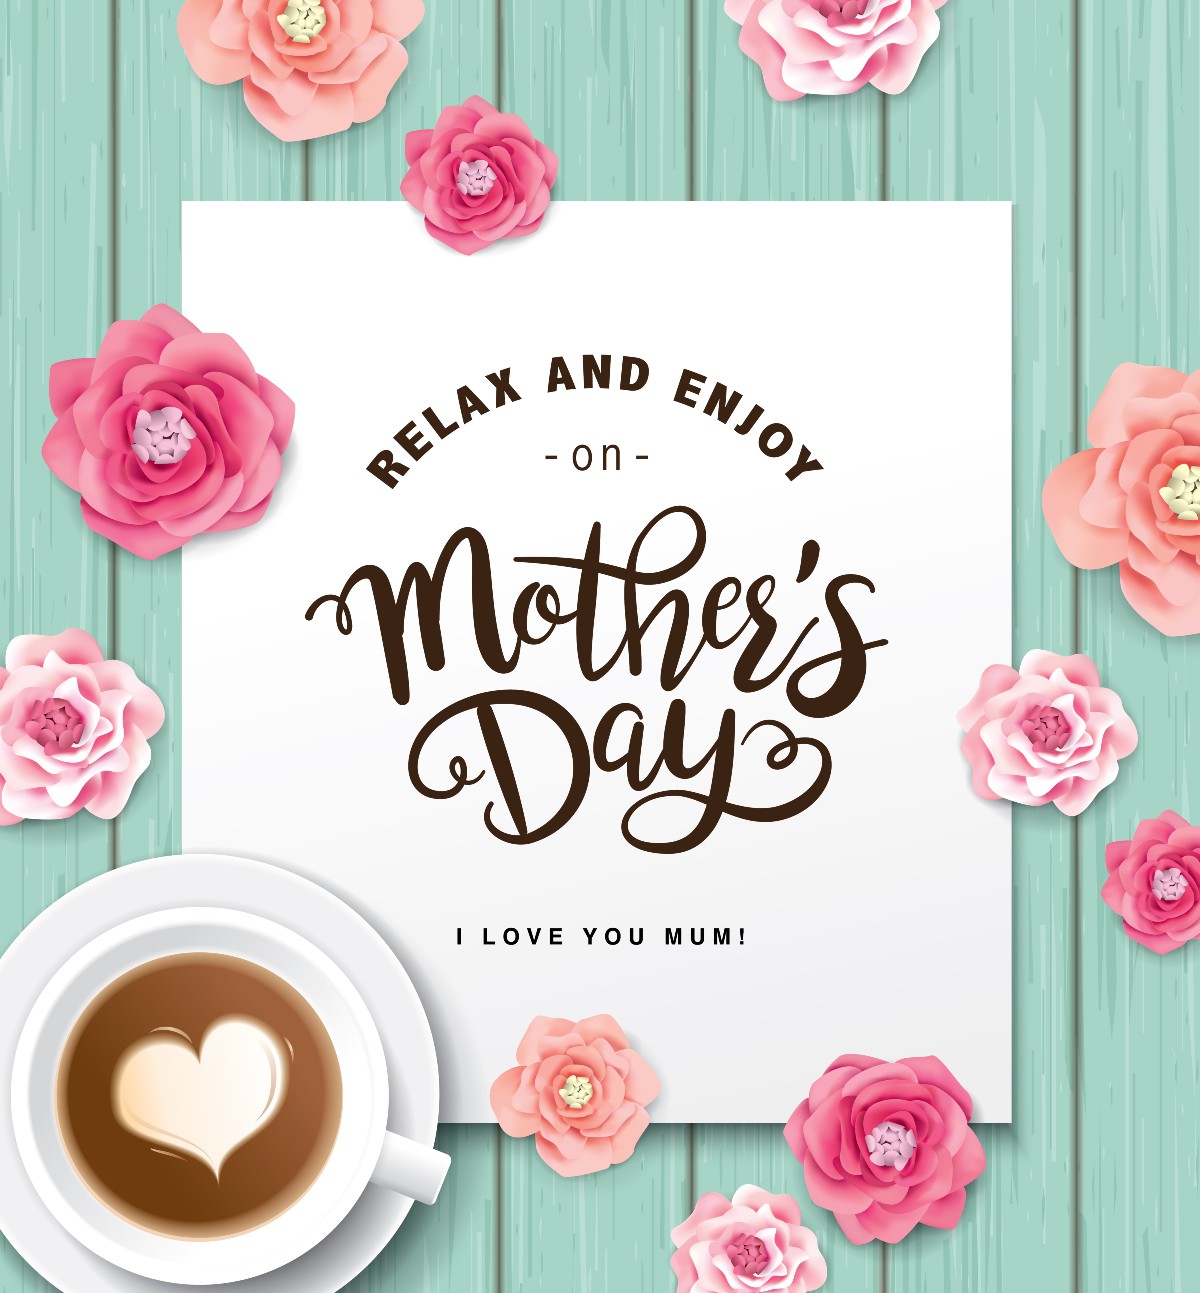 Mothers Day quotes, Mother's Day 2021: Wishes, messages, quotes and images  to make your mom feel special